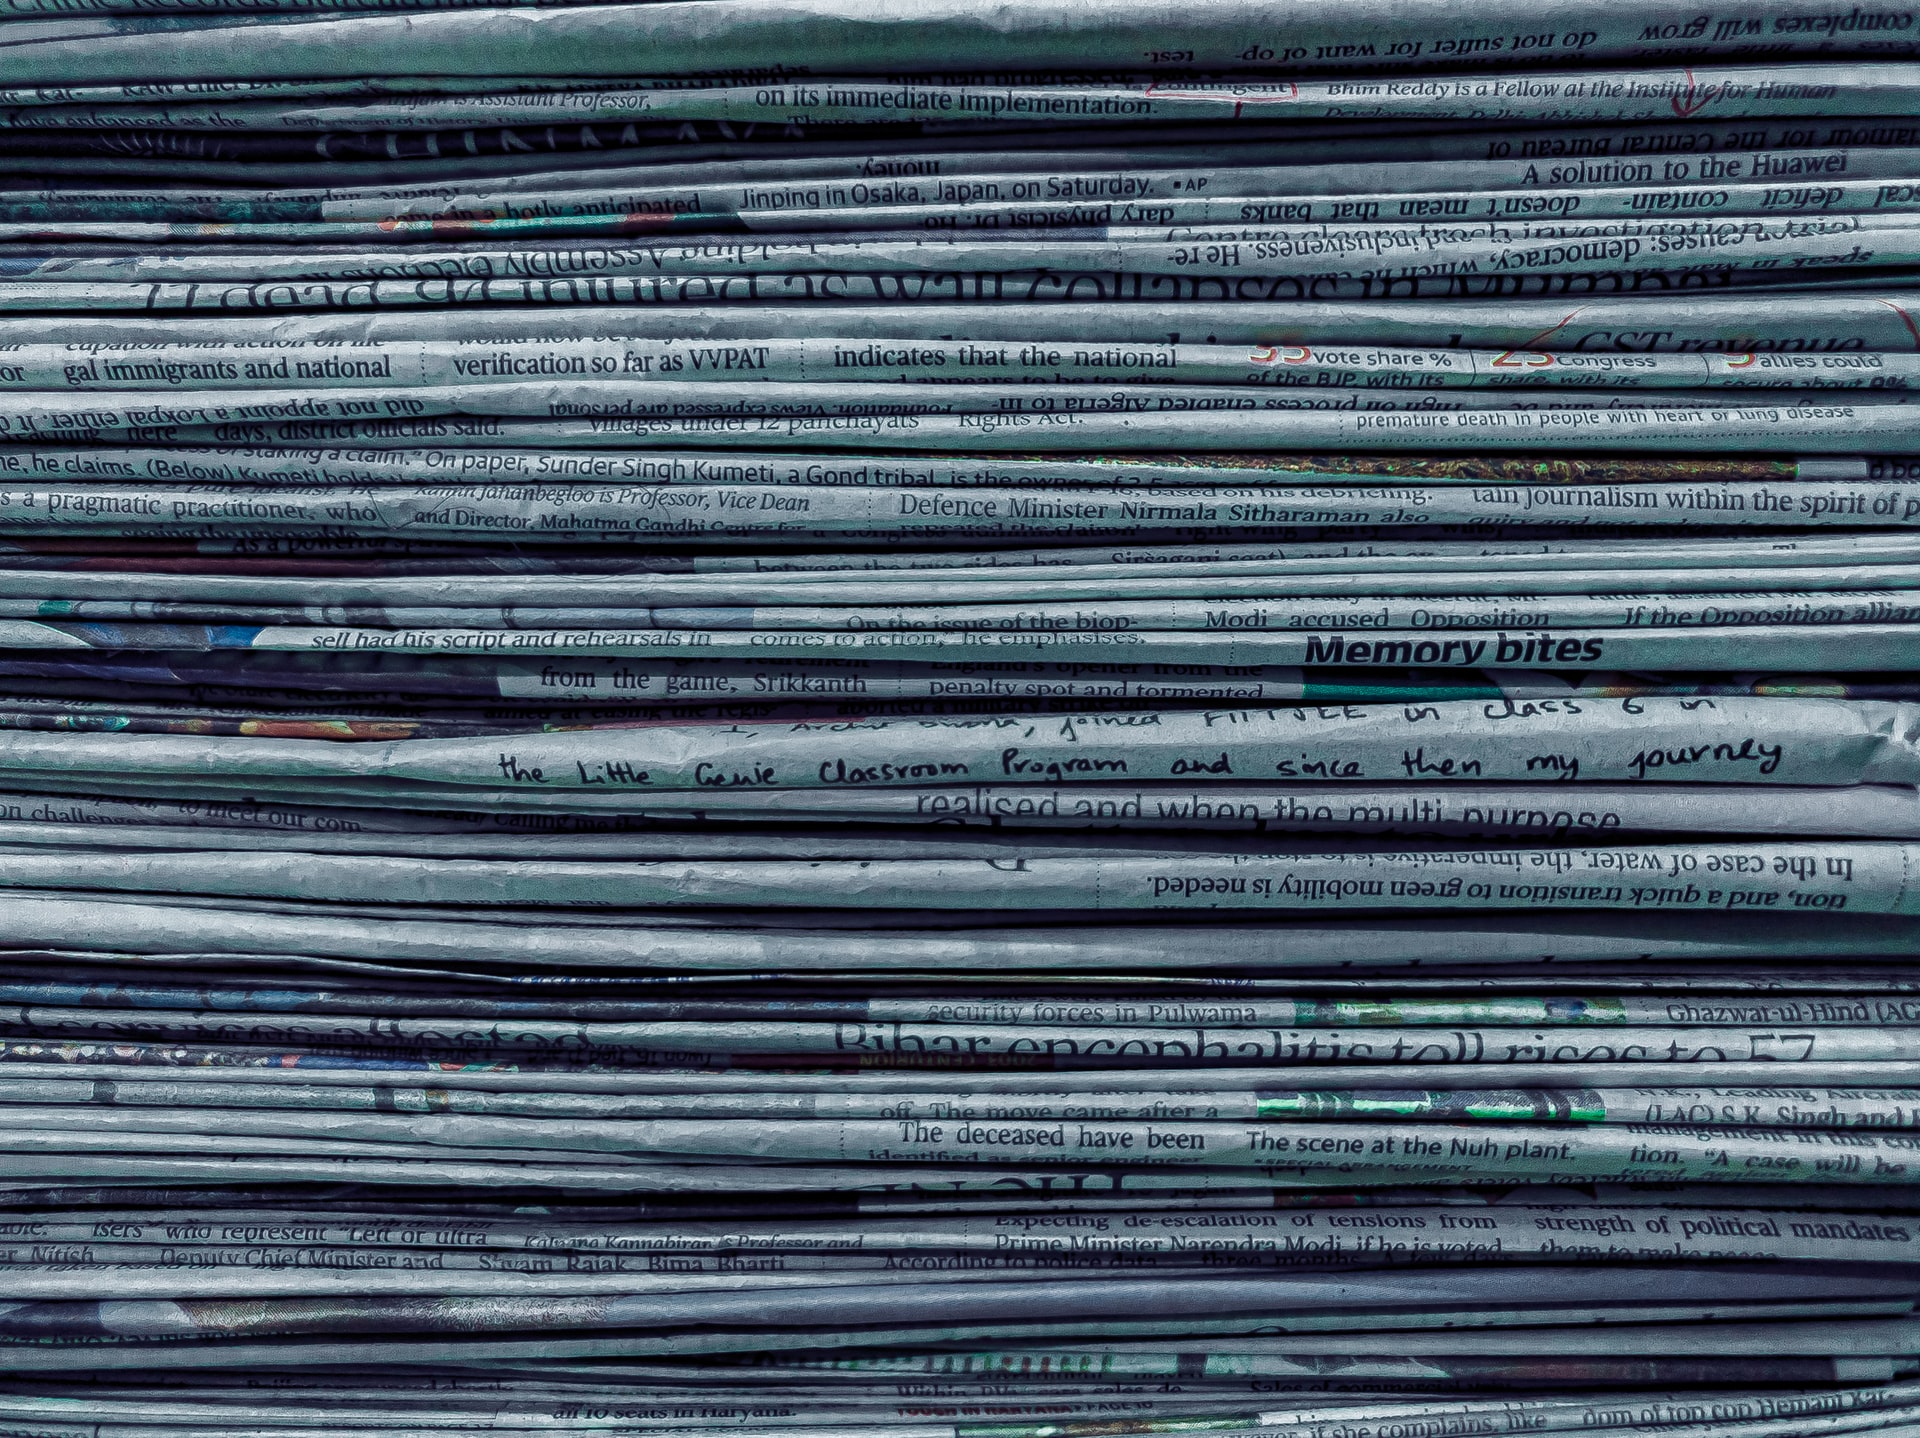 A photo of a pile of newspapers.